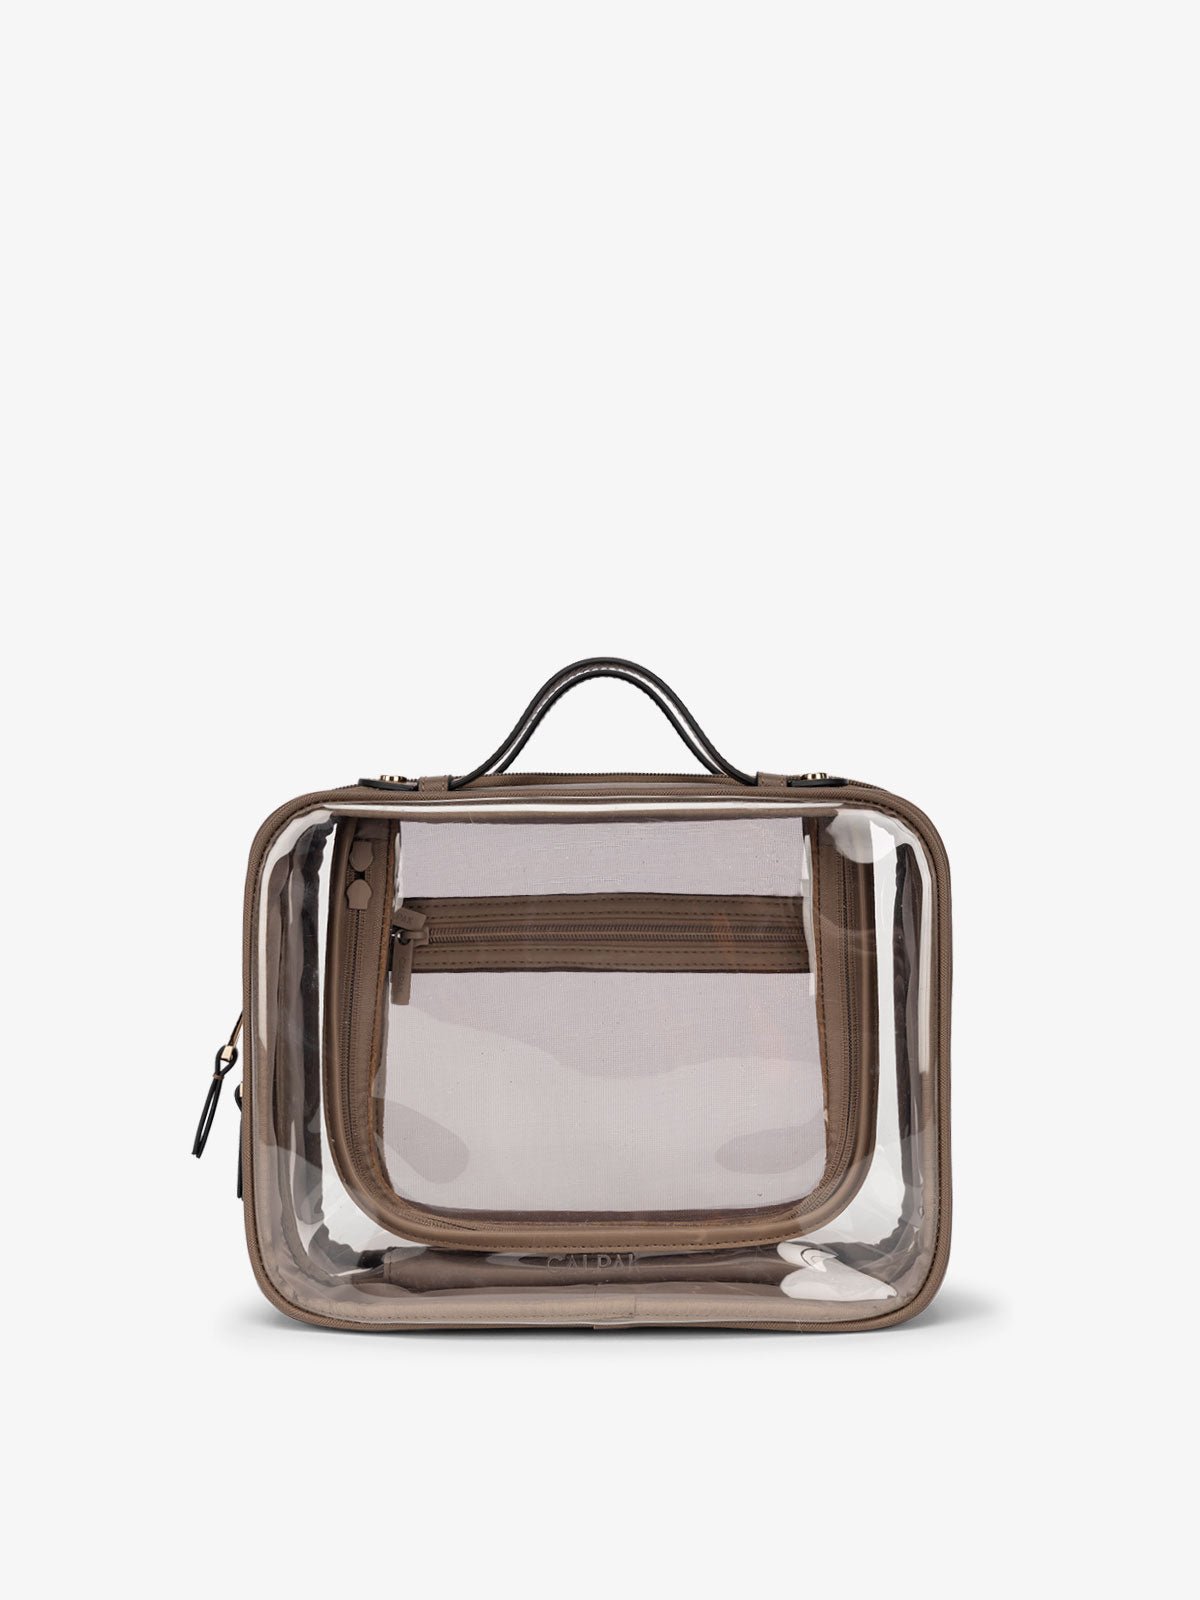 CALPAK Clear makeup bag with zippered compartments in mocha brown